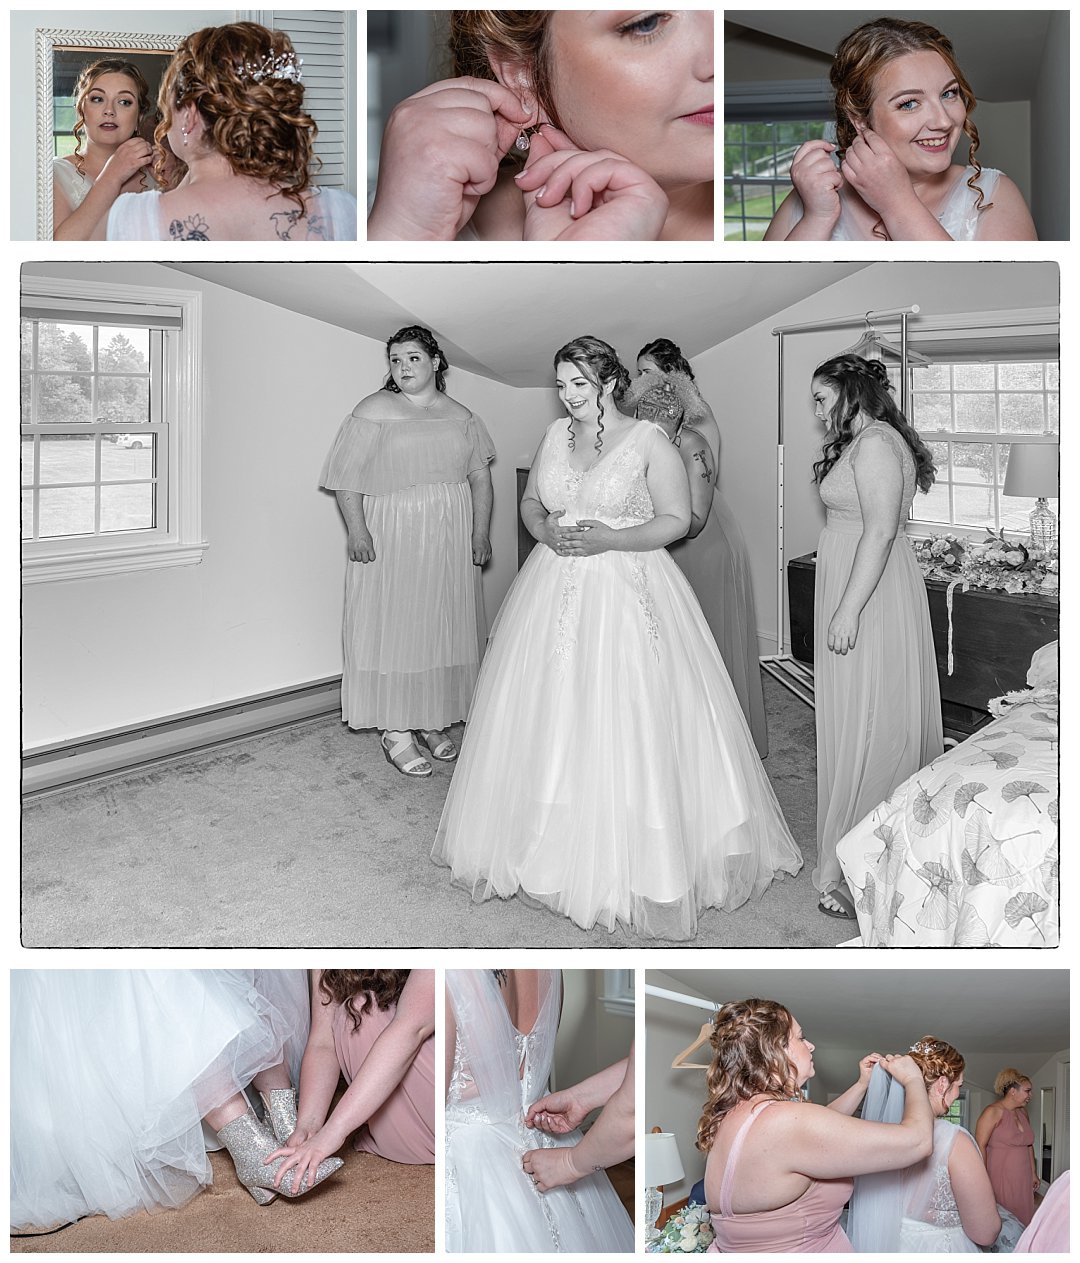 The bride gets ready for her wedding day at Healy Farm with her bridemaids.